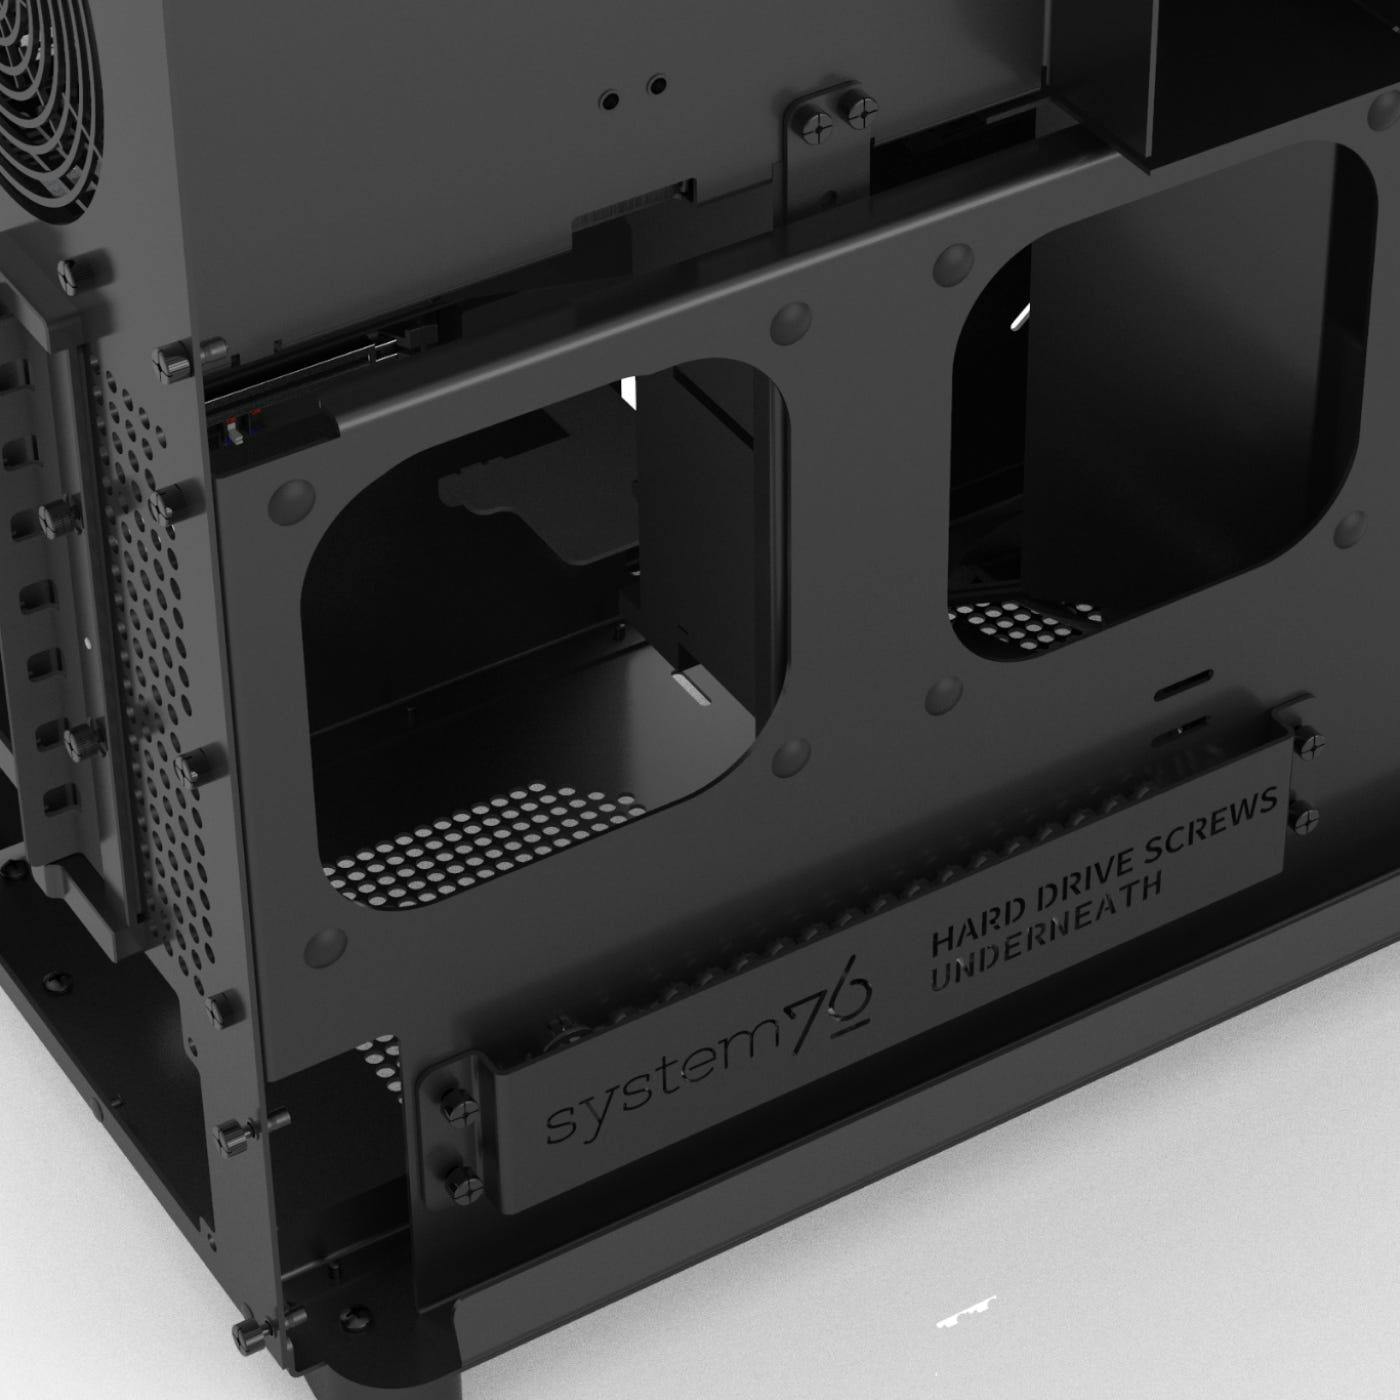 Detail of the aluminum chassis without any components installed.